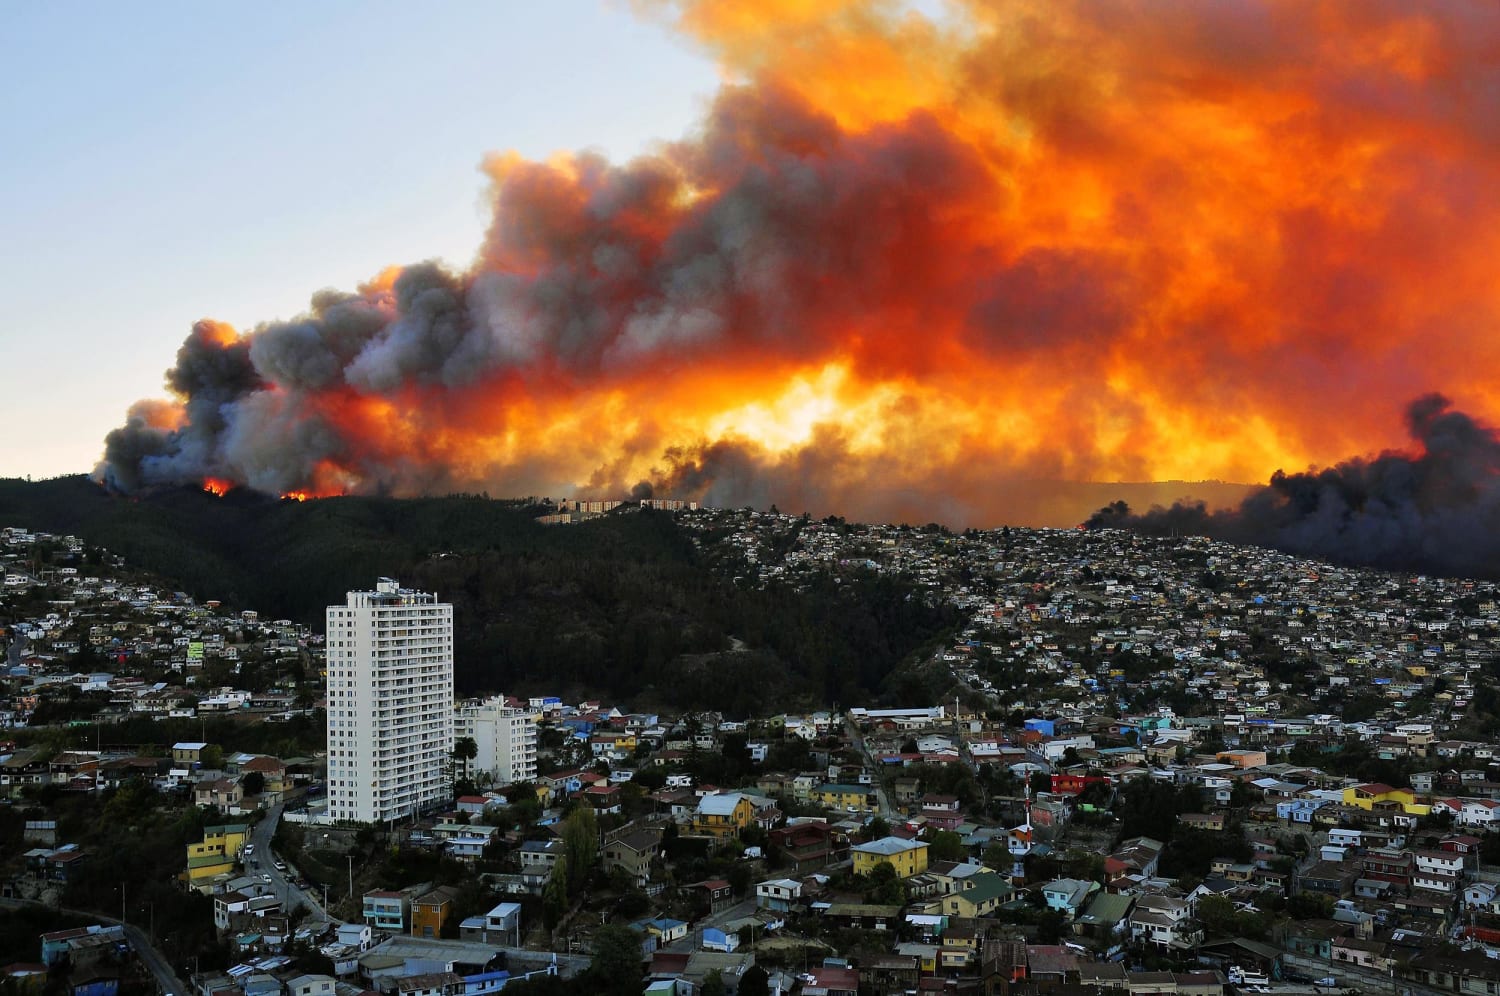 Image: Houses in flames during a fire near Santiago, Chile